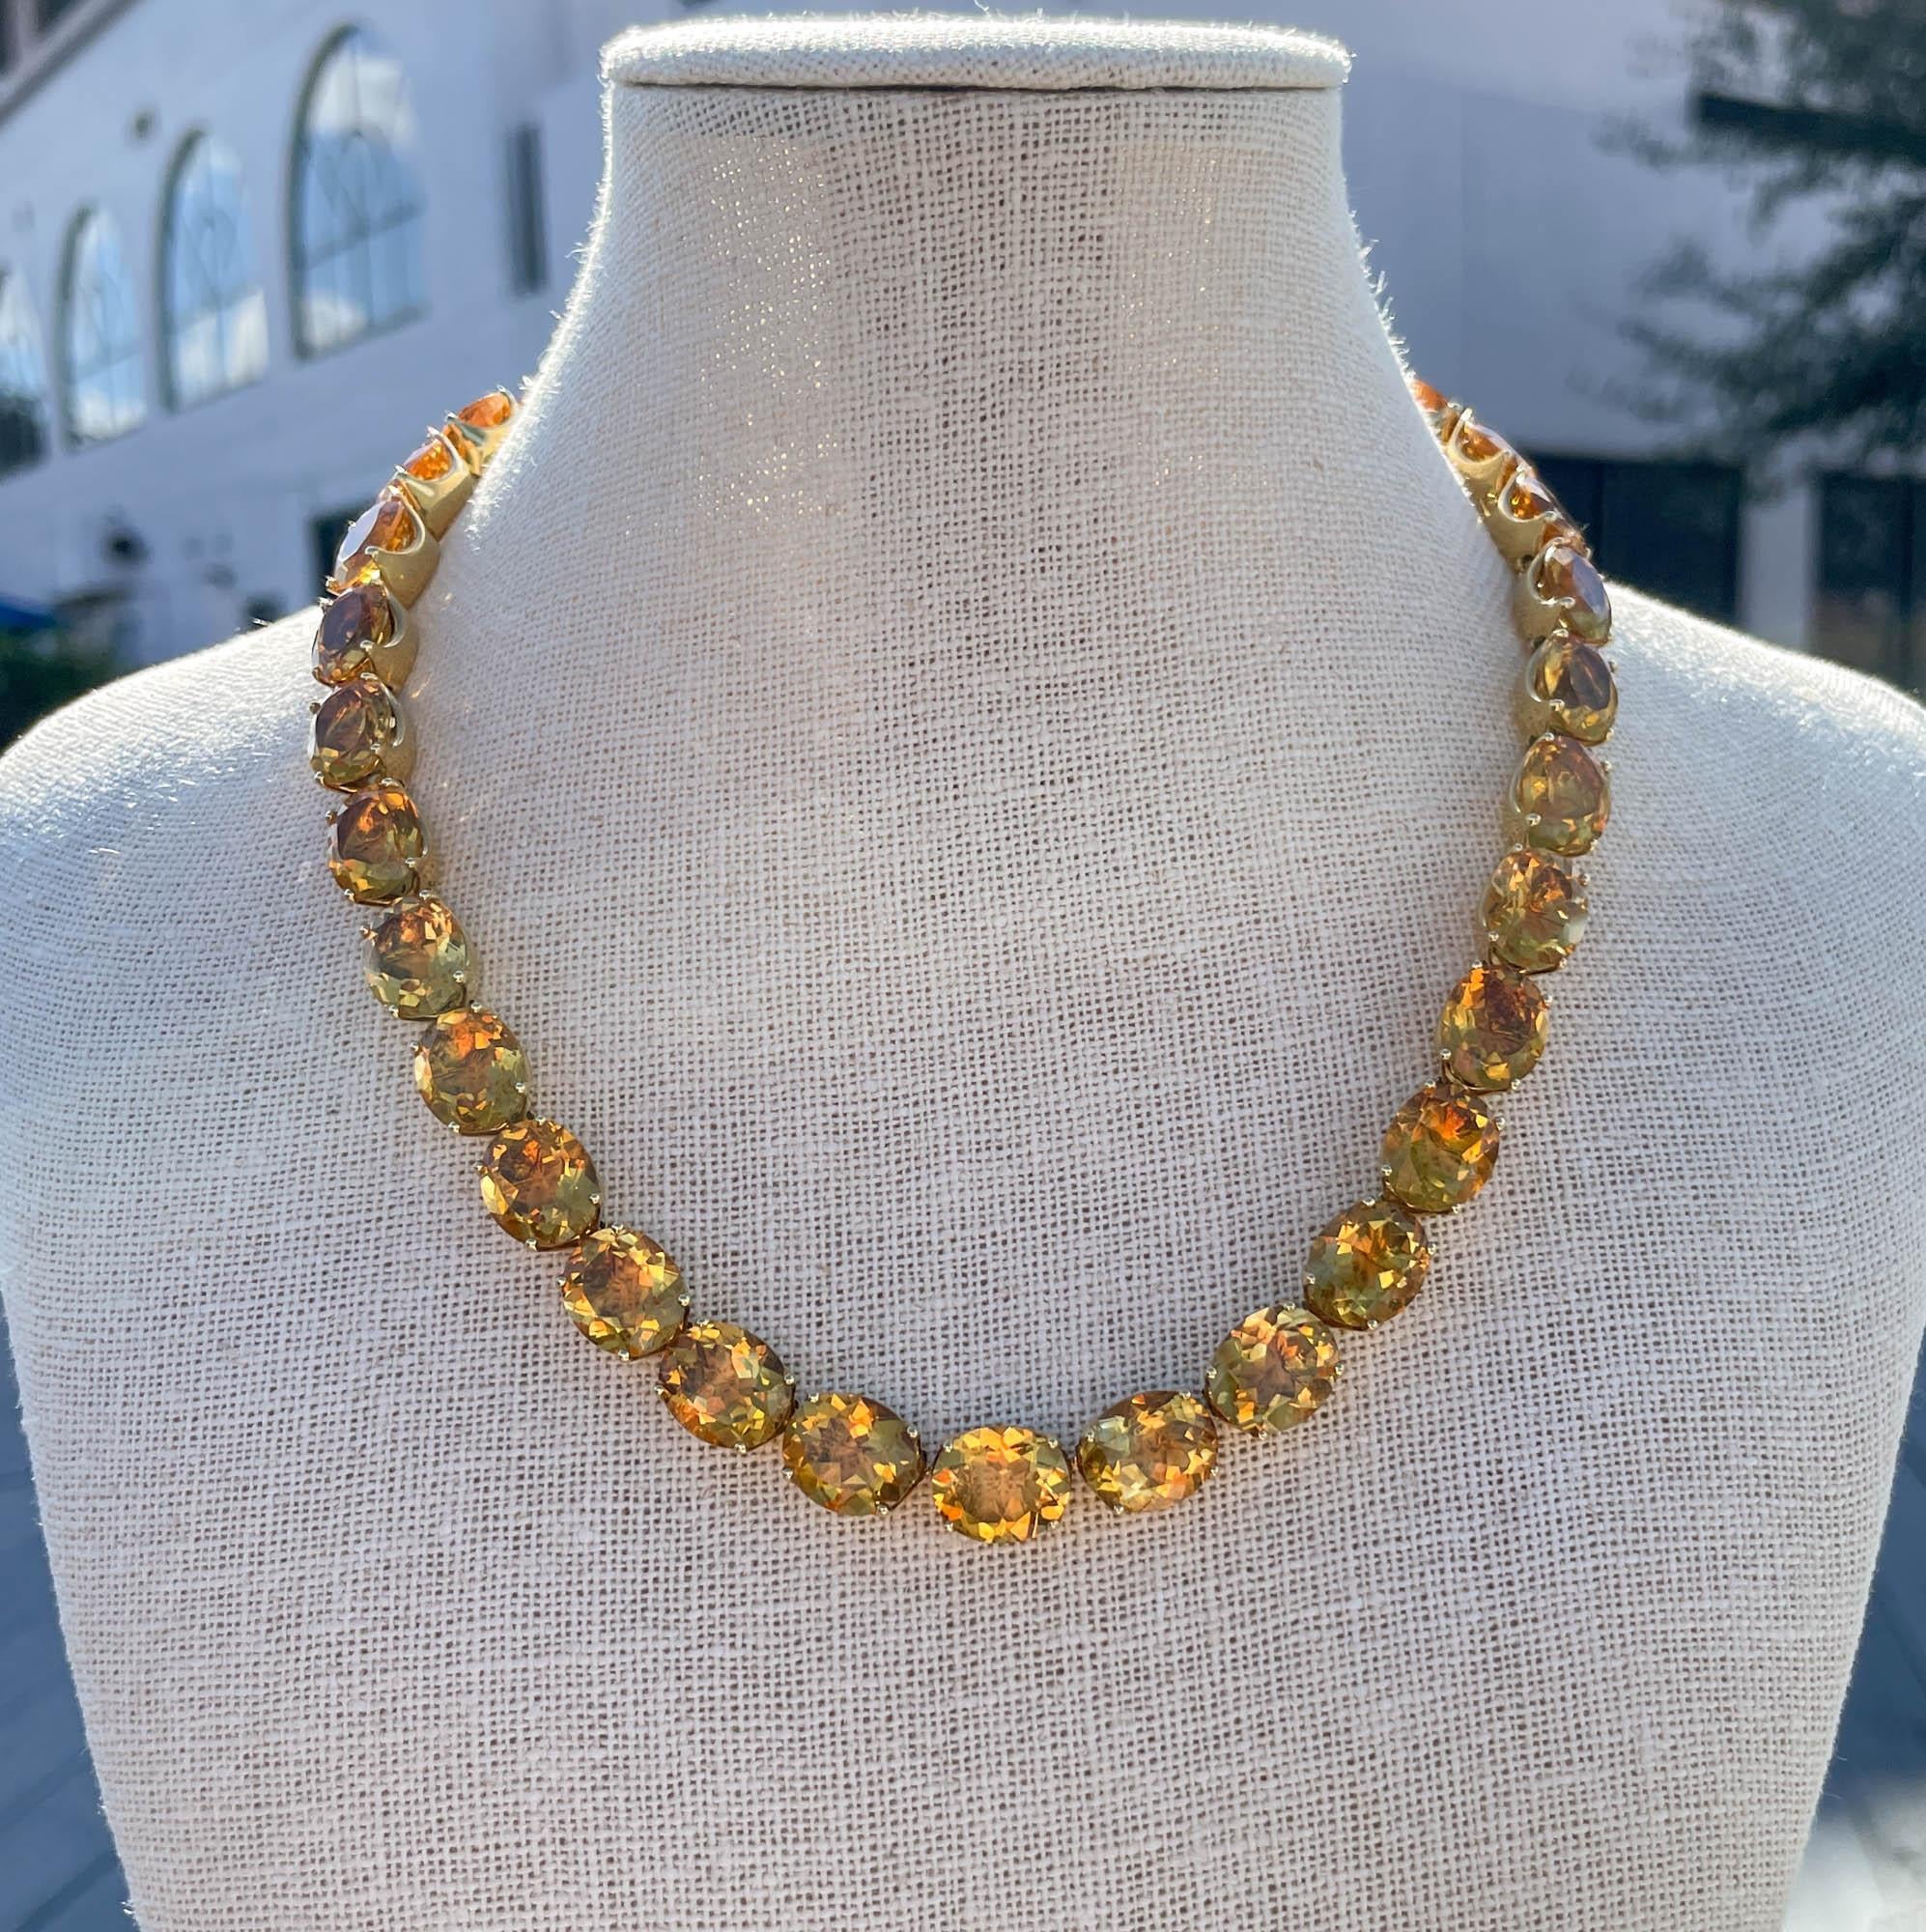 Jay Feder Vintage 18k Yellow Gold Oval Citrine Tennis Necklace
There are 34 Oval shaped citrines; estimated total weight is 137.7 carats.
The necklace is 17 inches long. Total weight of the necklace is 78.5 grams.

Please view our photos and videos